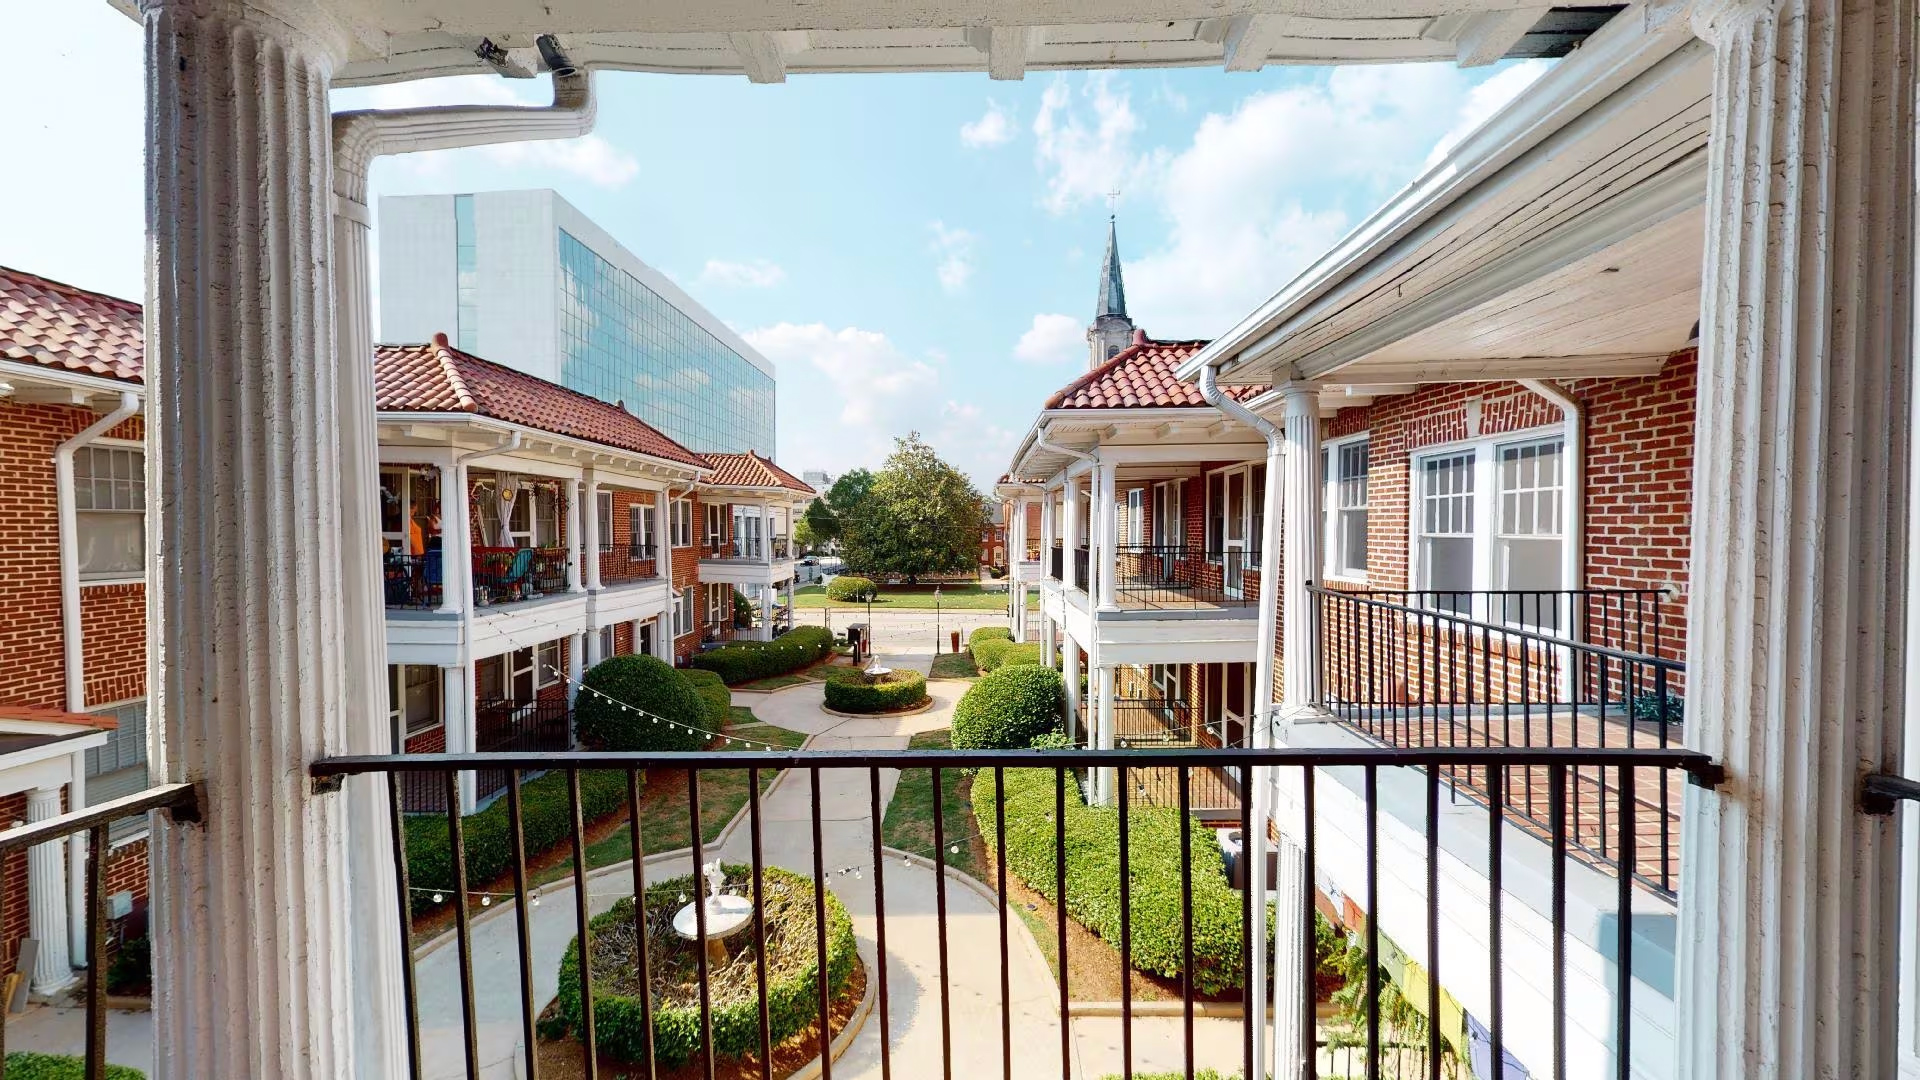 Outdoor balcony overlooking the neighborhood at Candler Commons, located in Decatur, Georgia